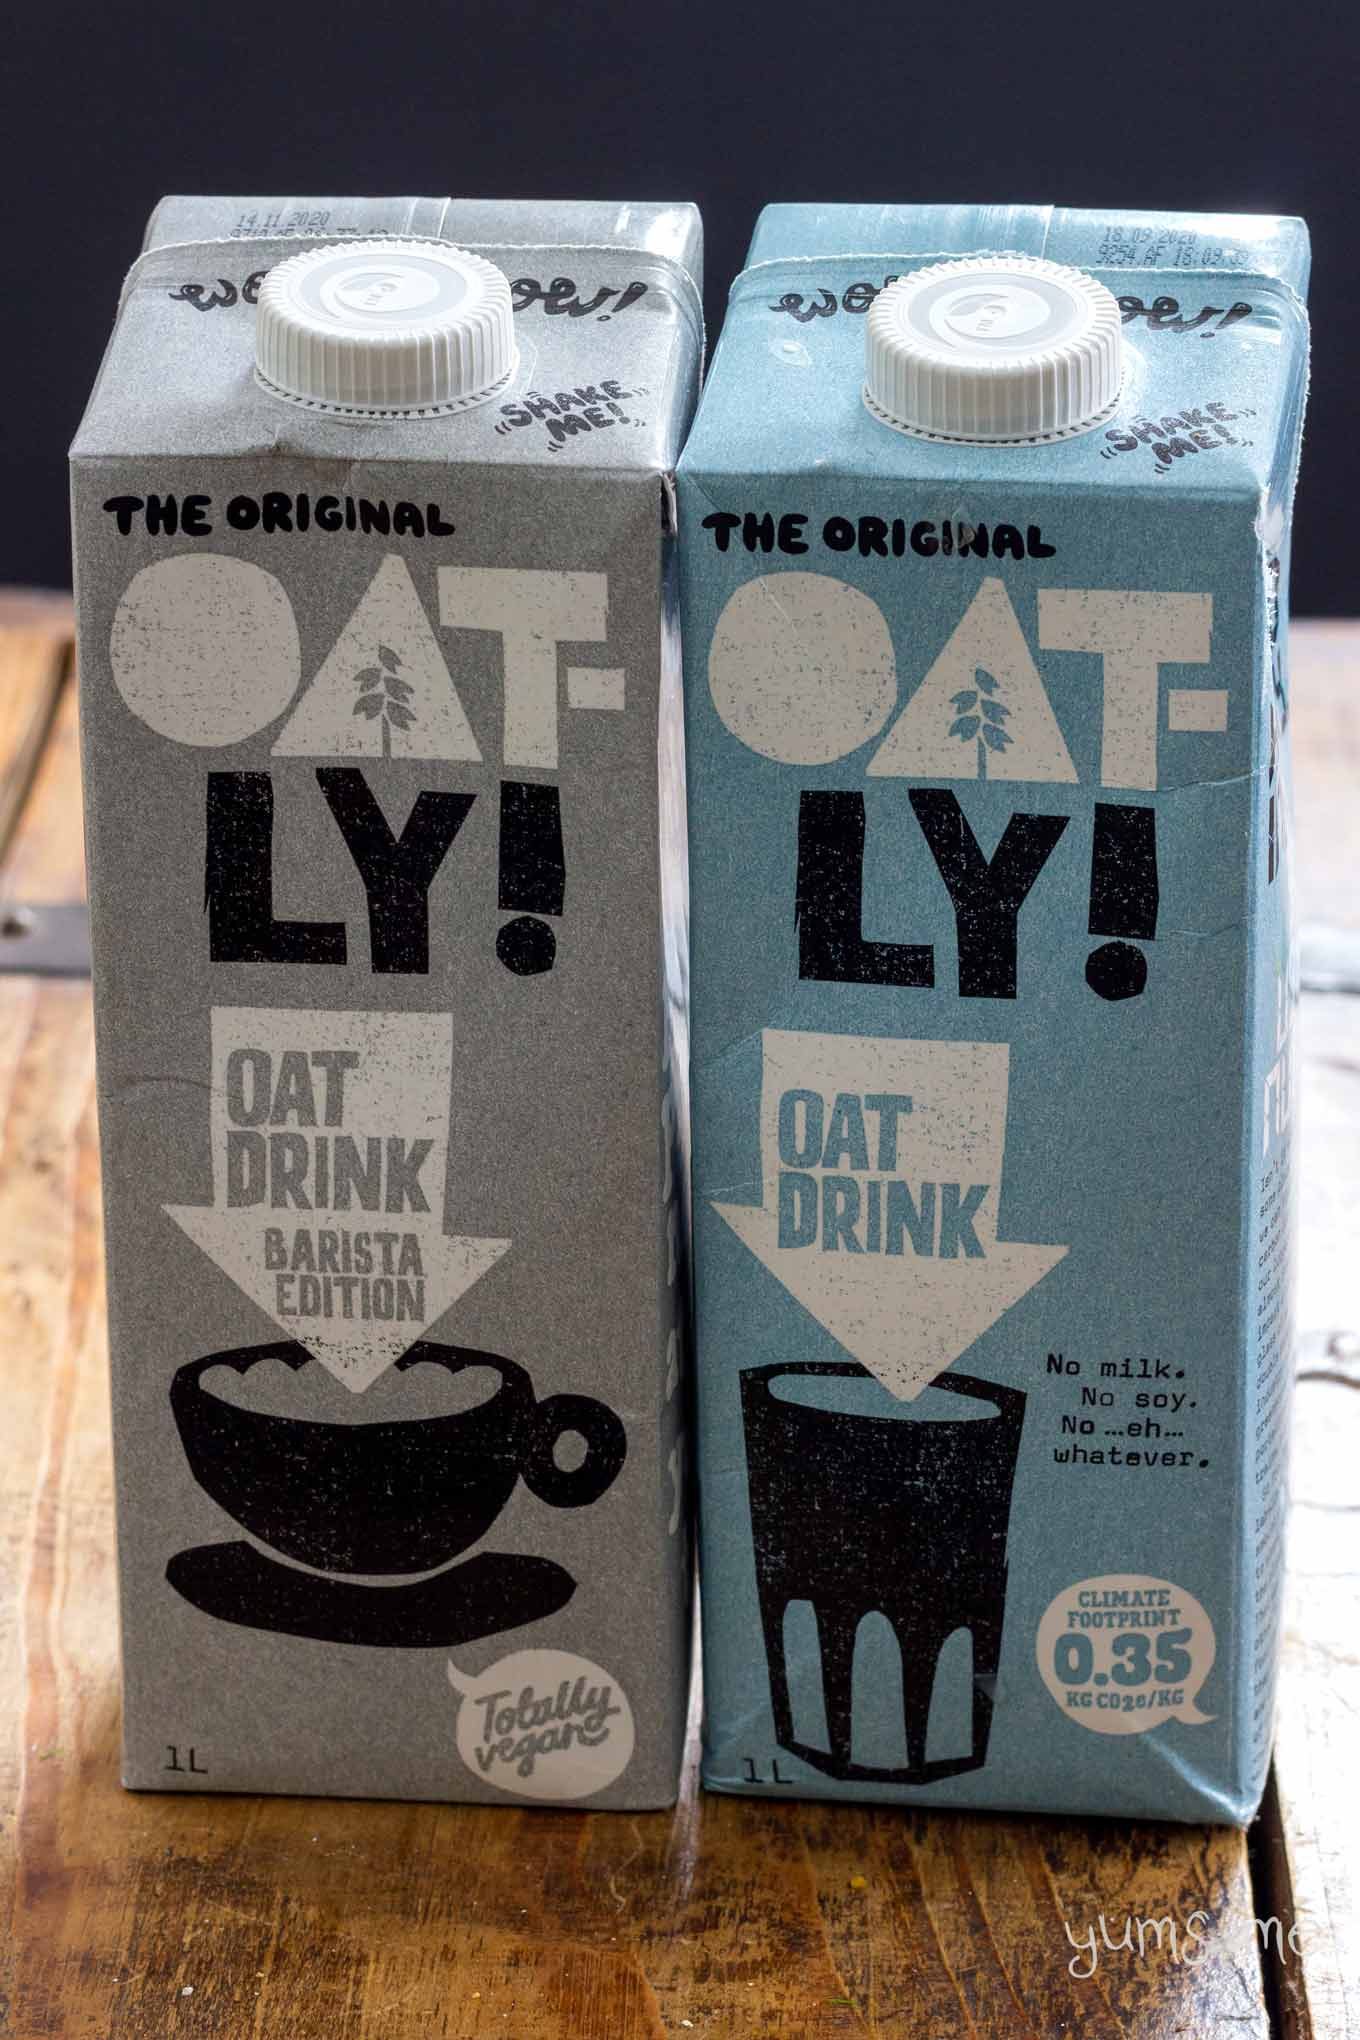 Two cartons of Oatly side by side on a wooden table. Barista (grey), and original (blue).